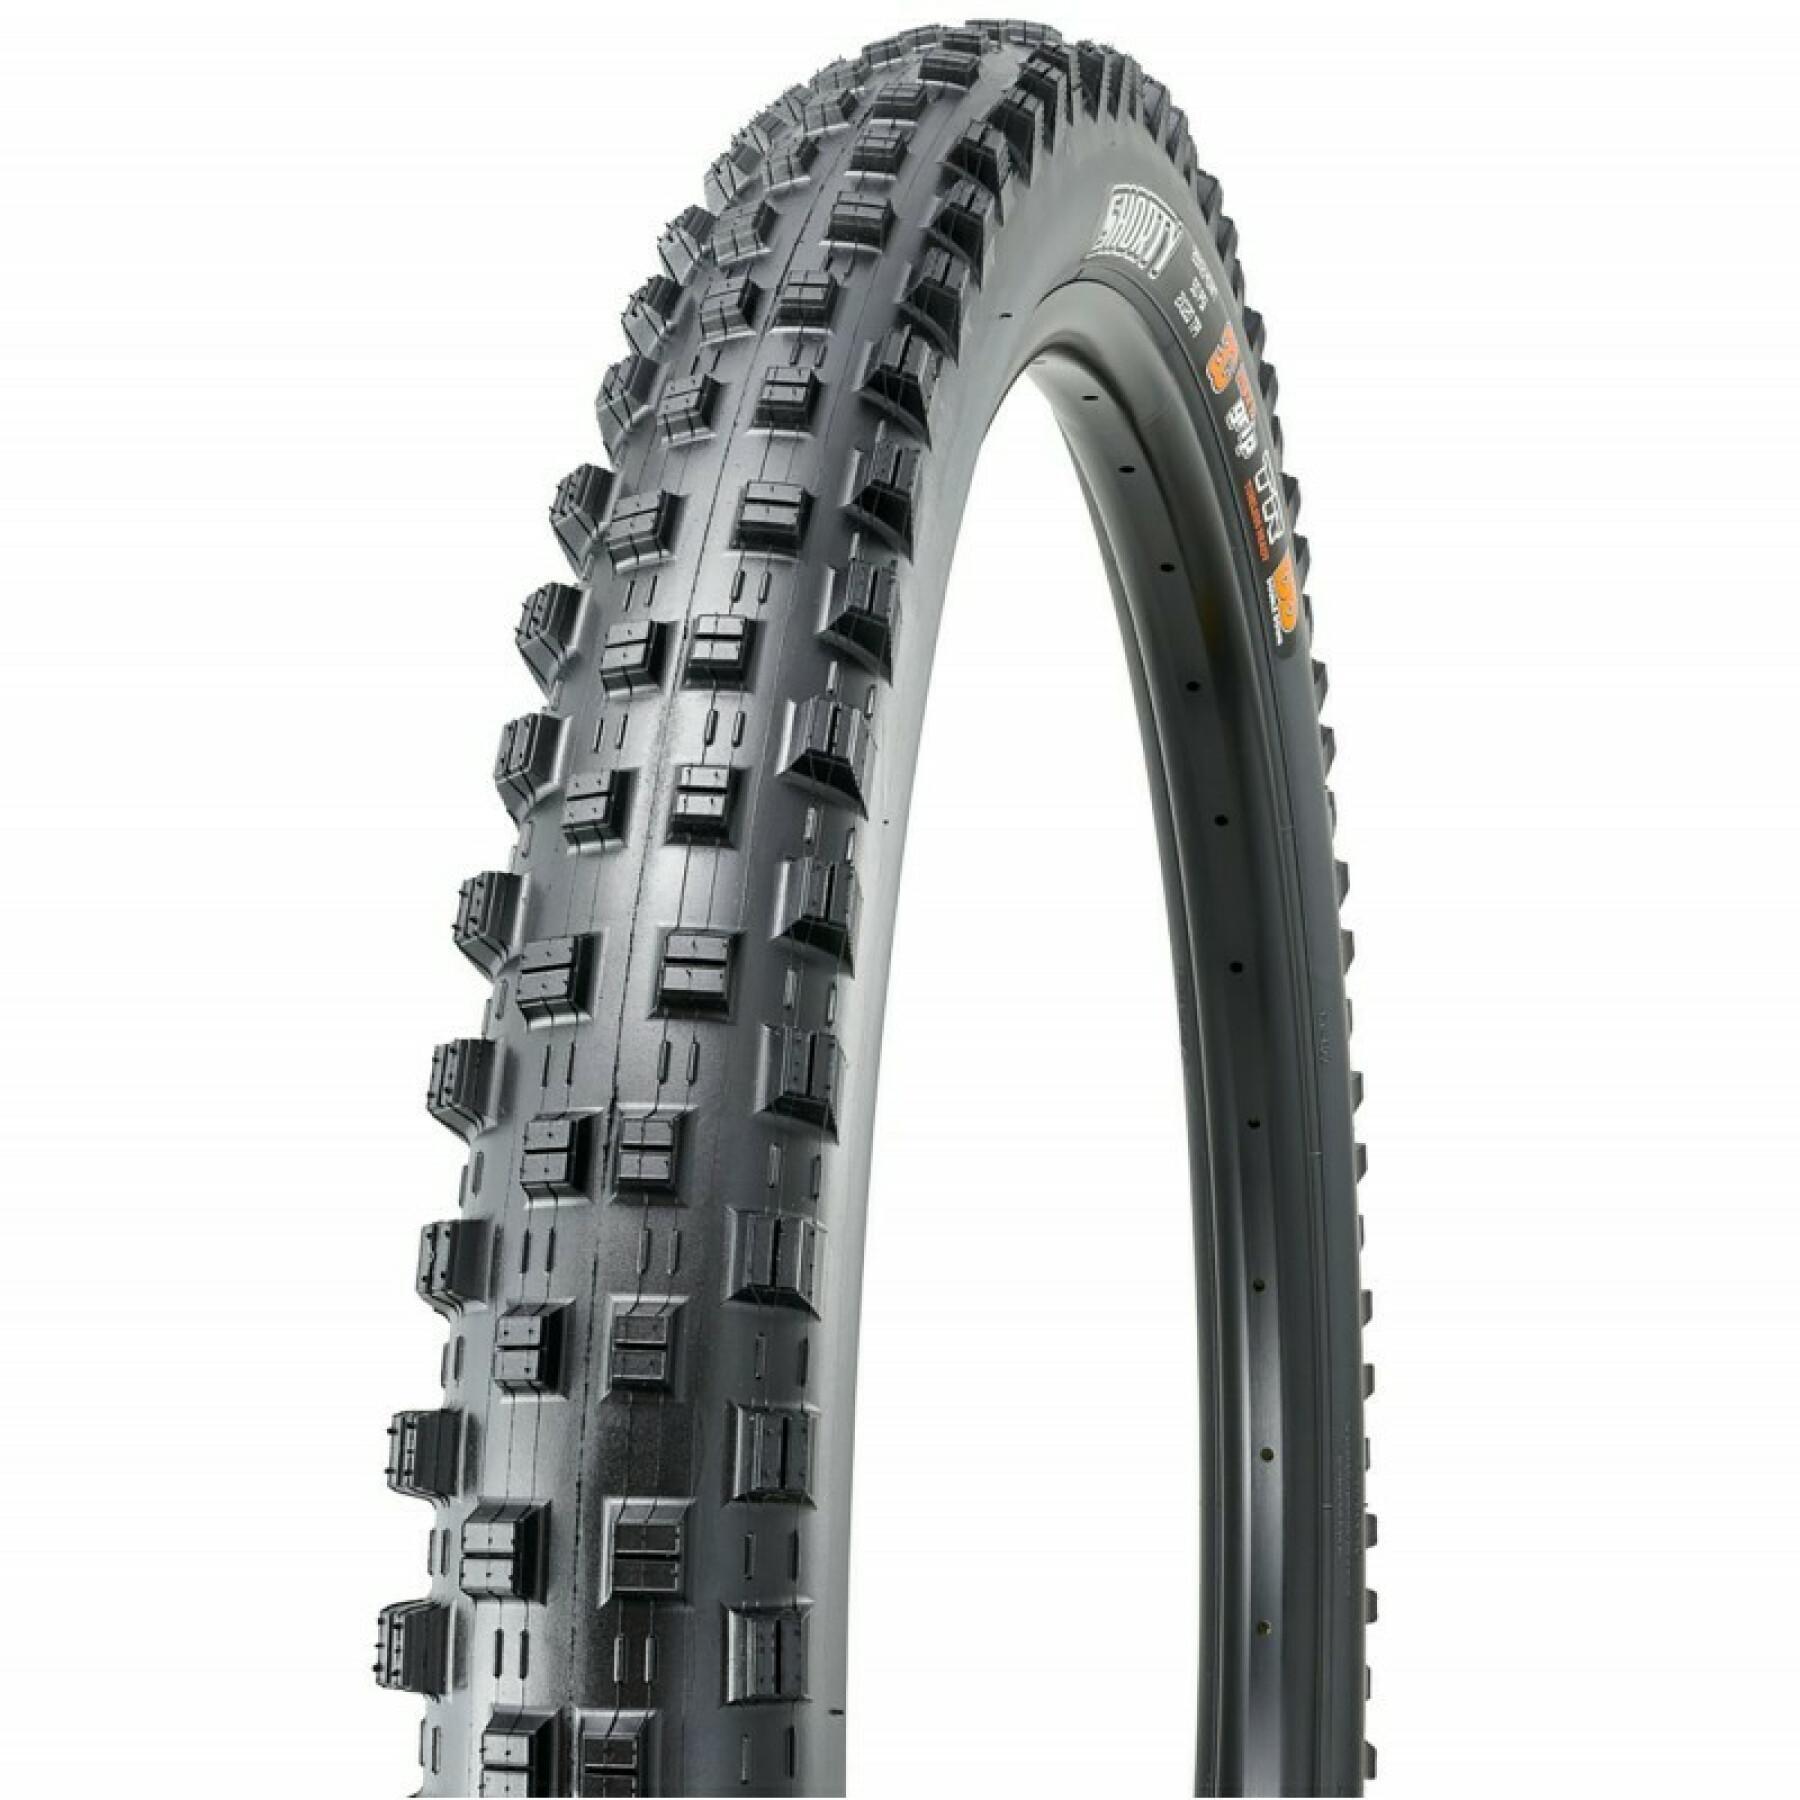 Zachte band Maxxis Shorty 29x2.40wt 3c Grip / Tubeless Ready / dh